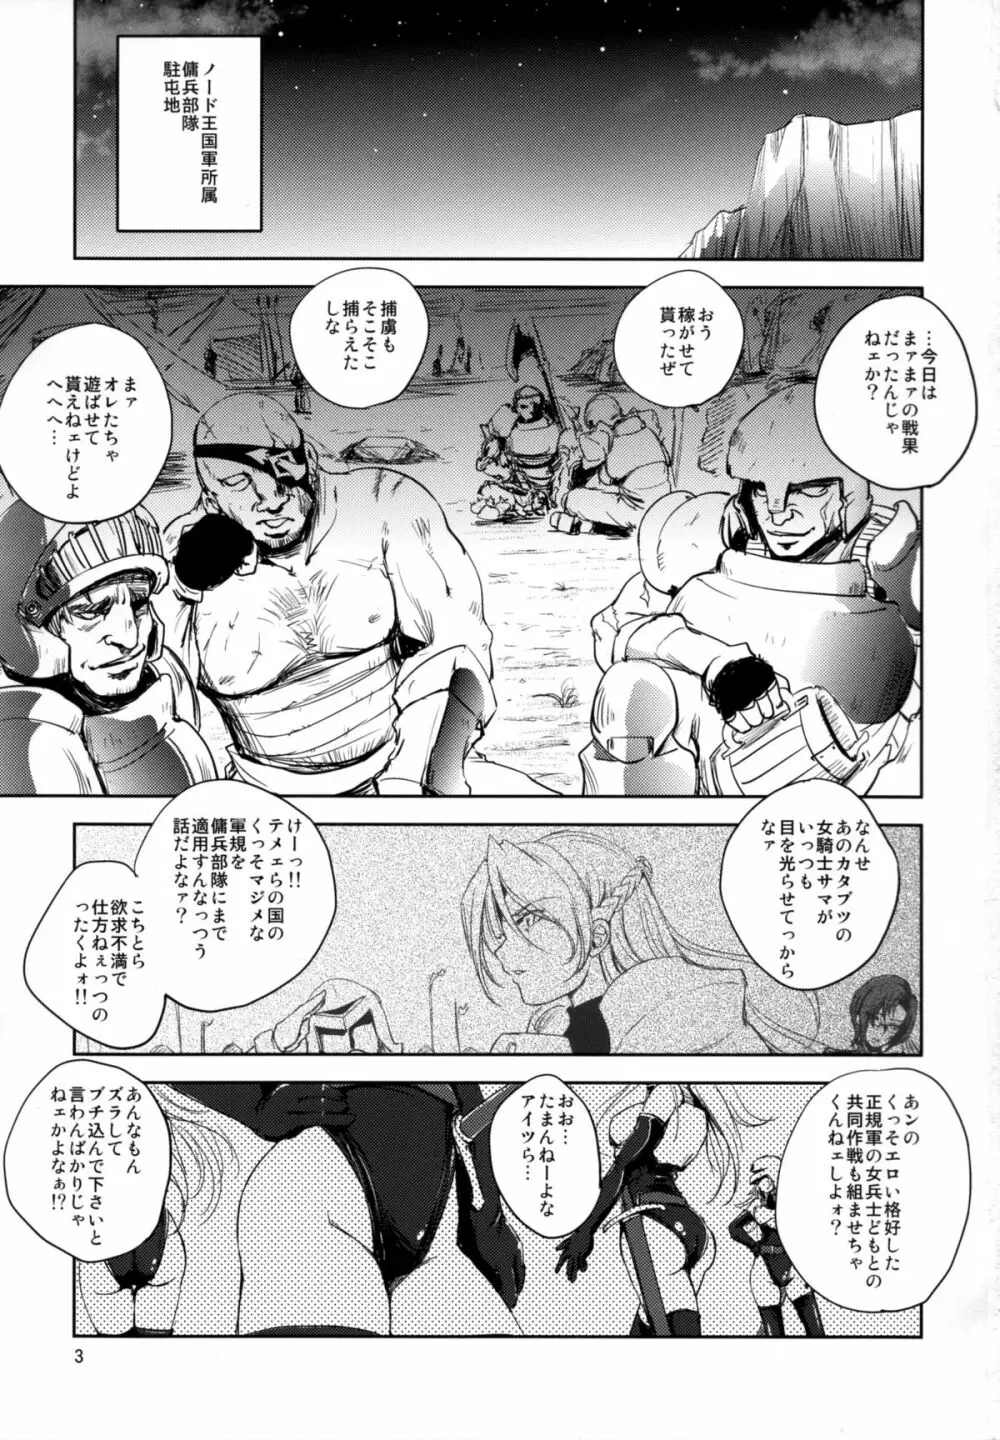 GRASSEN'S WAR ANOTHER STORY Ex #05 ノード侵攻 V Page.3